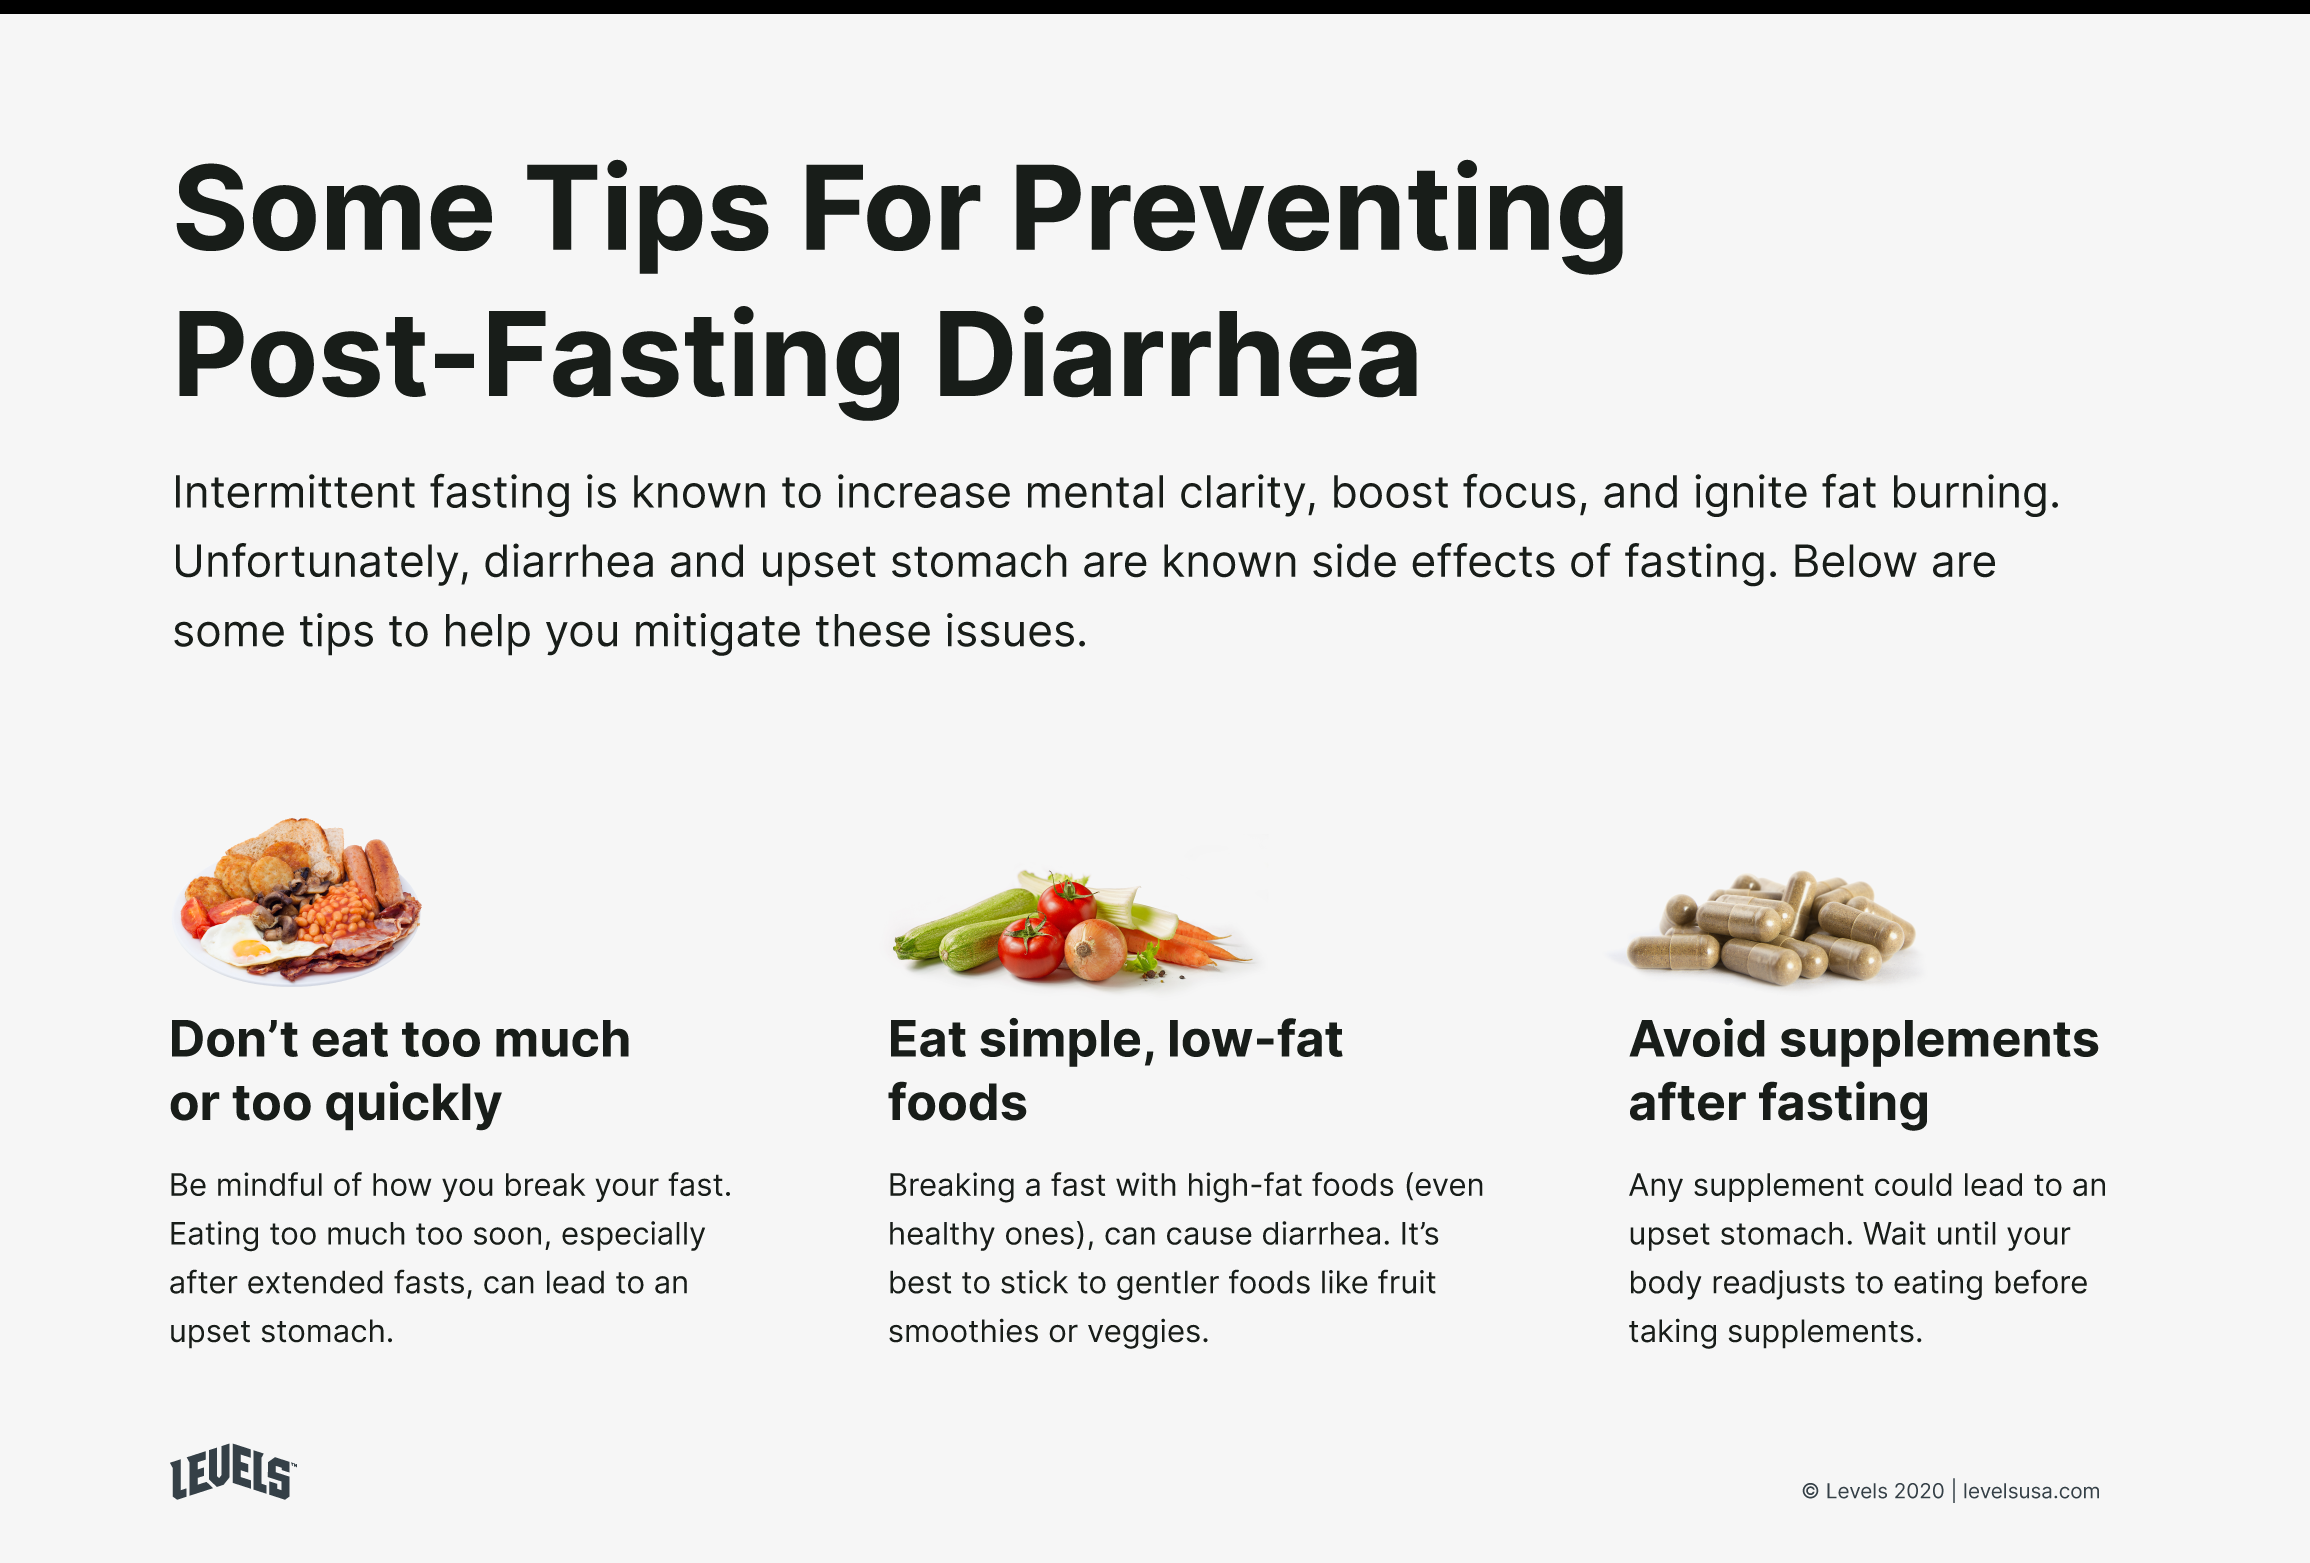 Does Water Fasting Cause Diarrhea?